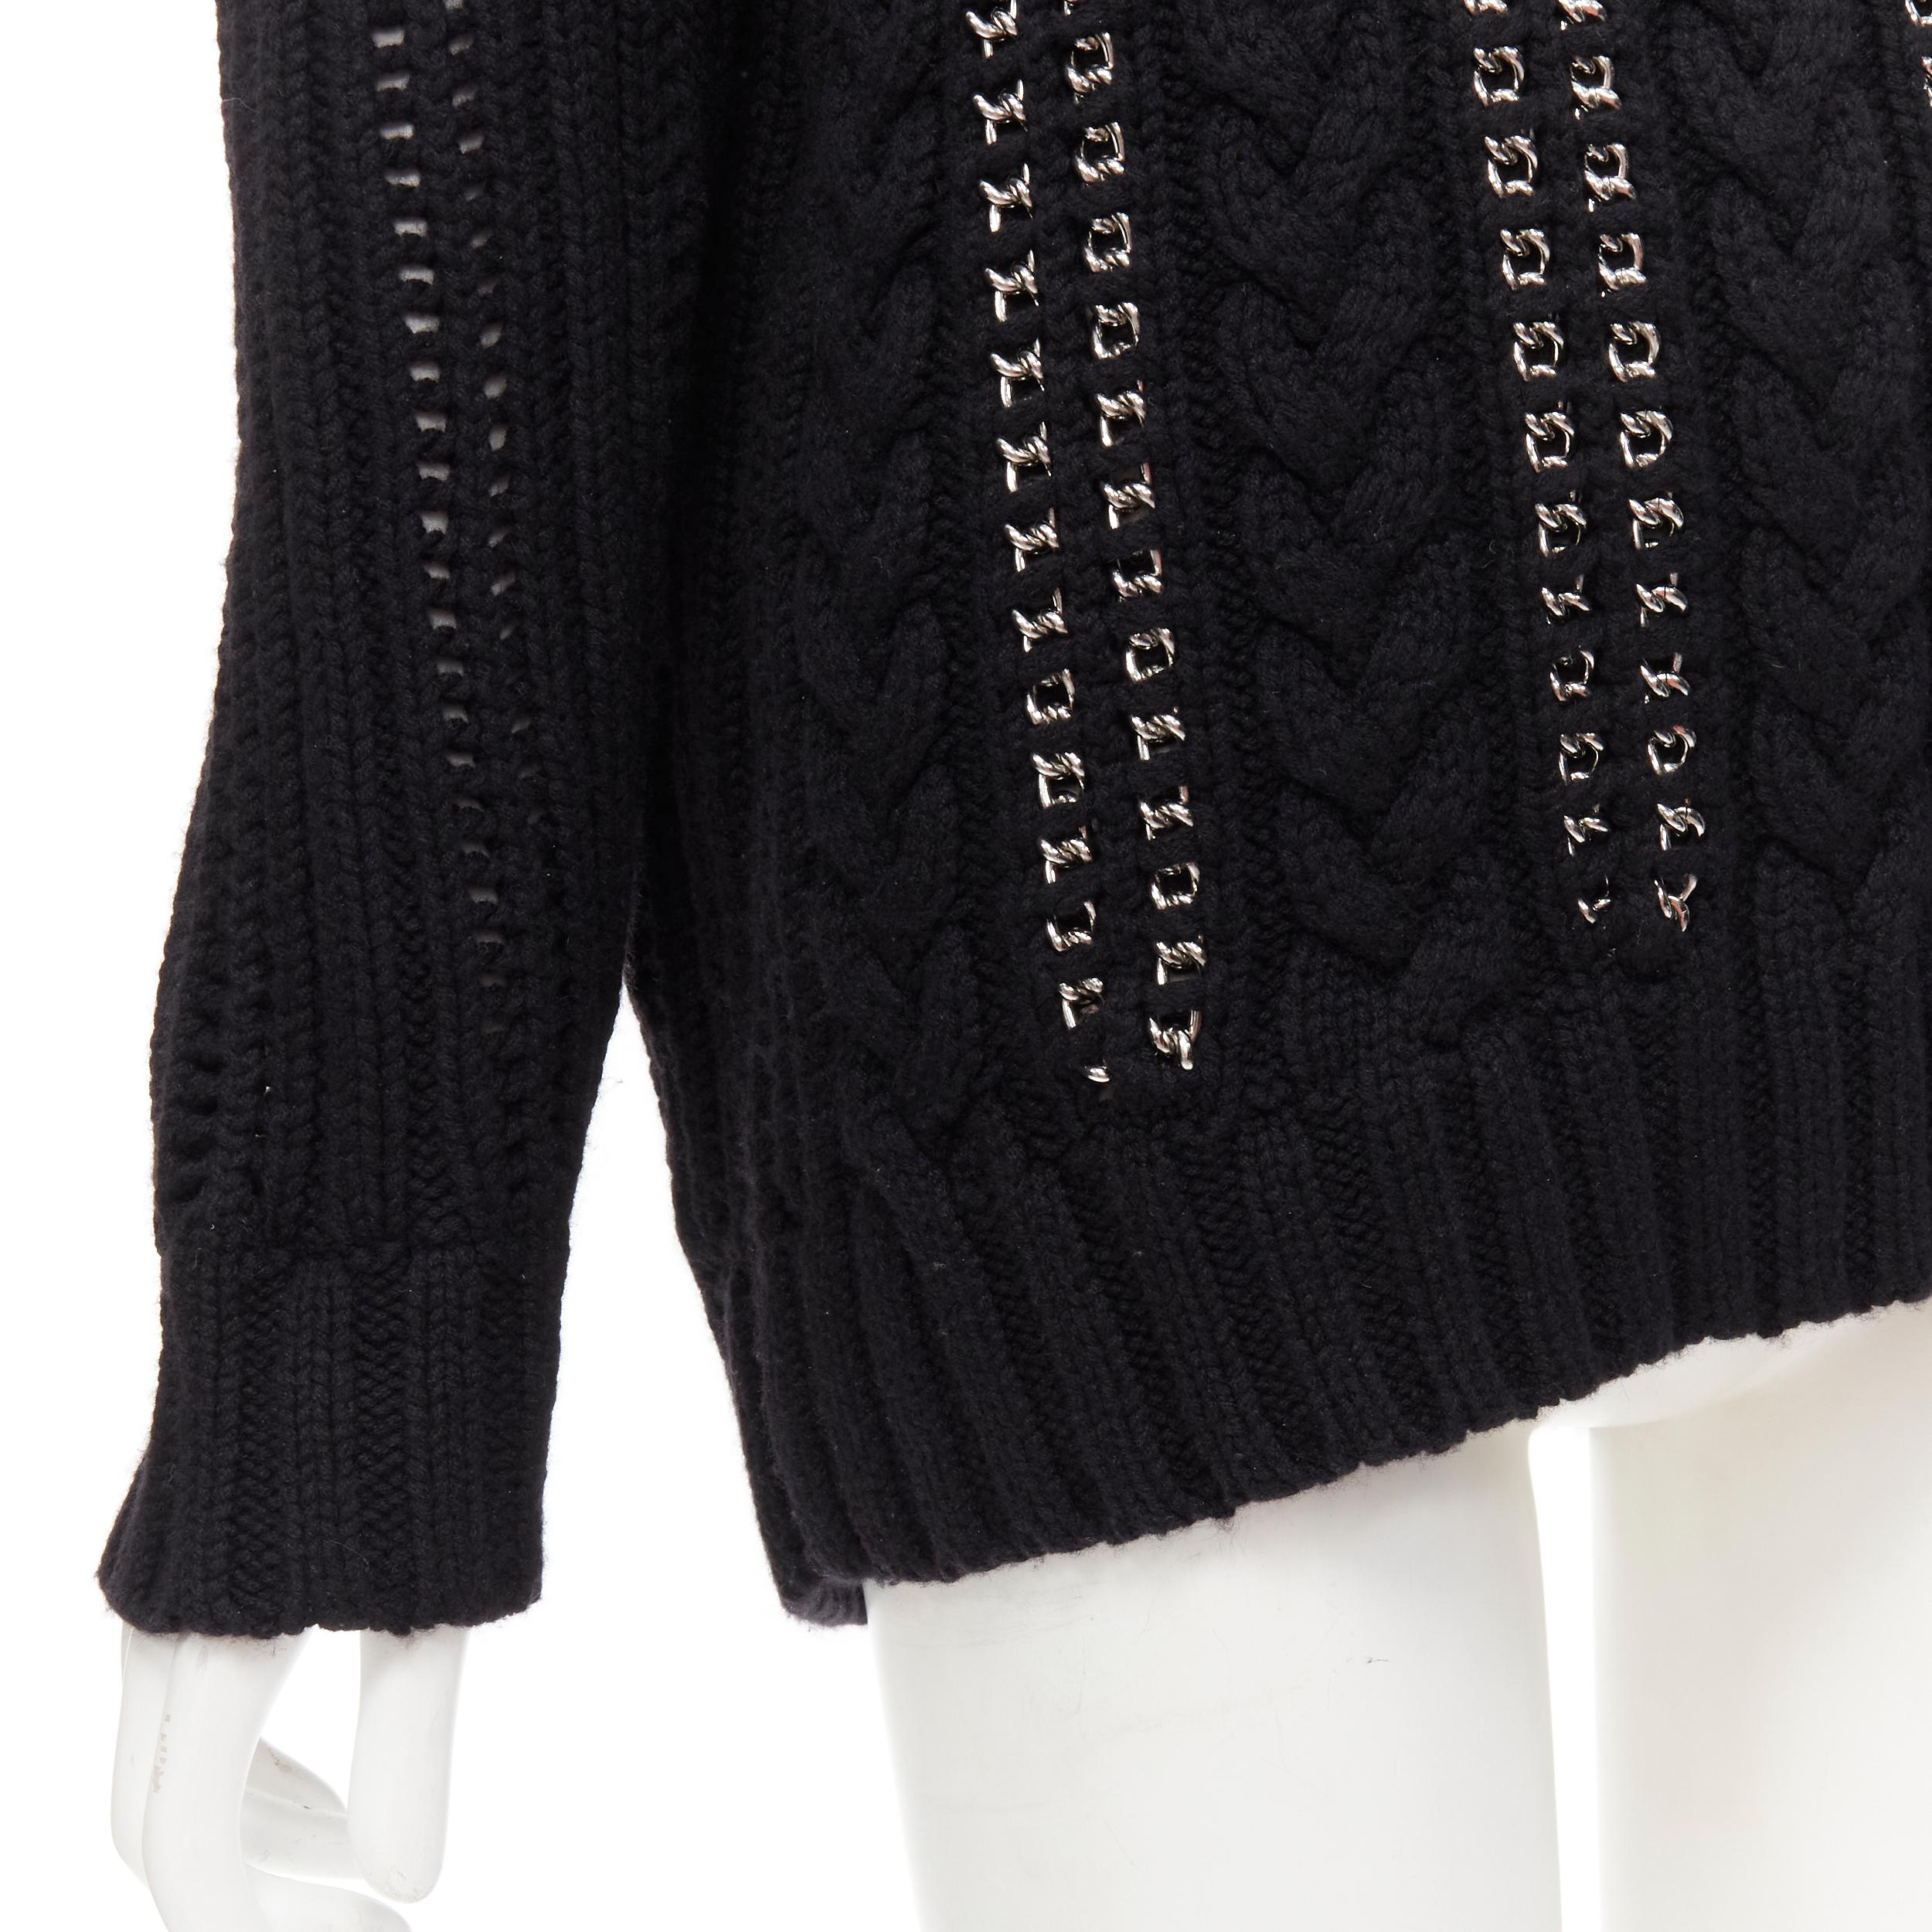 Women's ALEXANDER MCQUEEN 100% cashmere black silver chain cable knit cut out sweater M